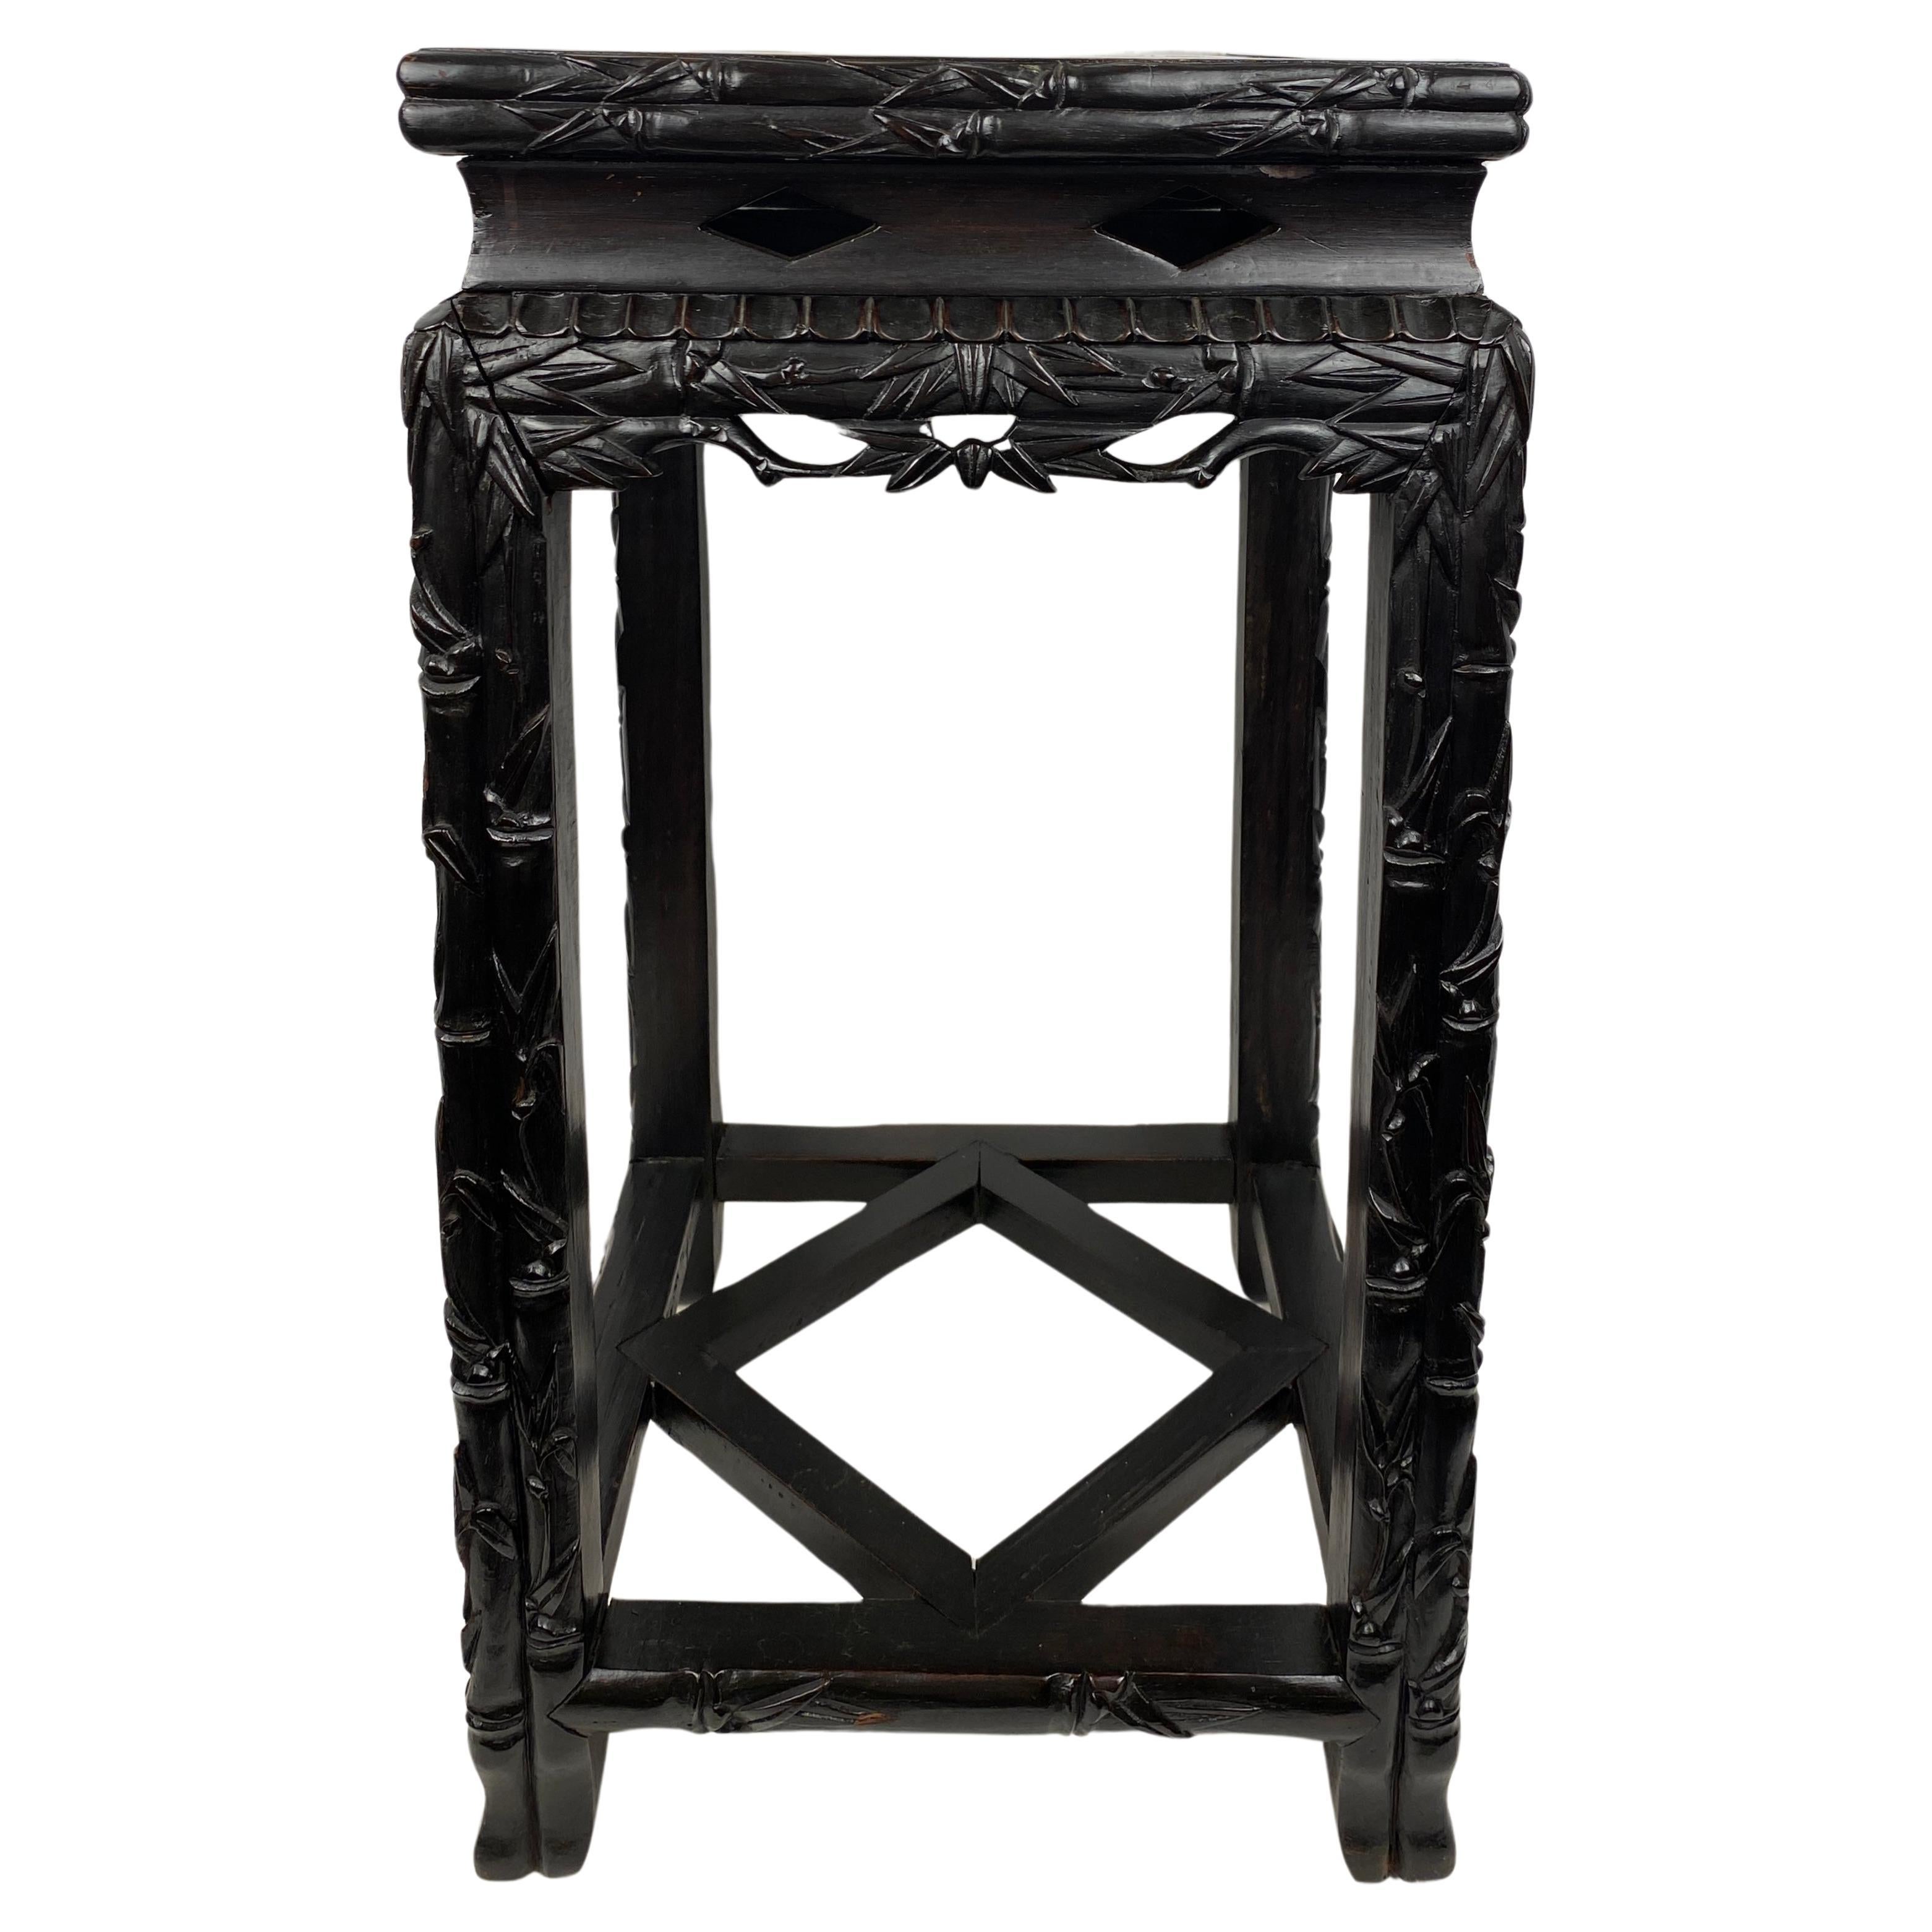 A good quality, hand-crafted 19th Century Chinese end table or side table. Interesting and intricately hand-carved frame. Made from rosewood which give this end table a wonderful antique flair. 

This 19th Century Chinese end table will enhance any